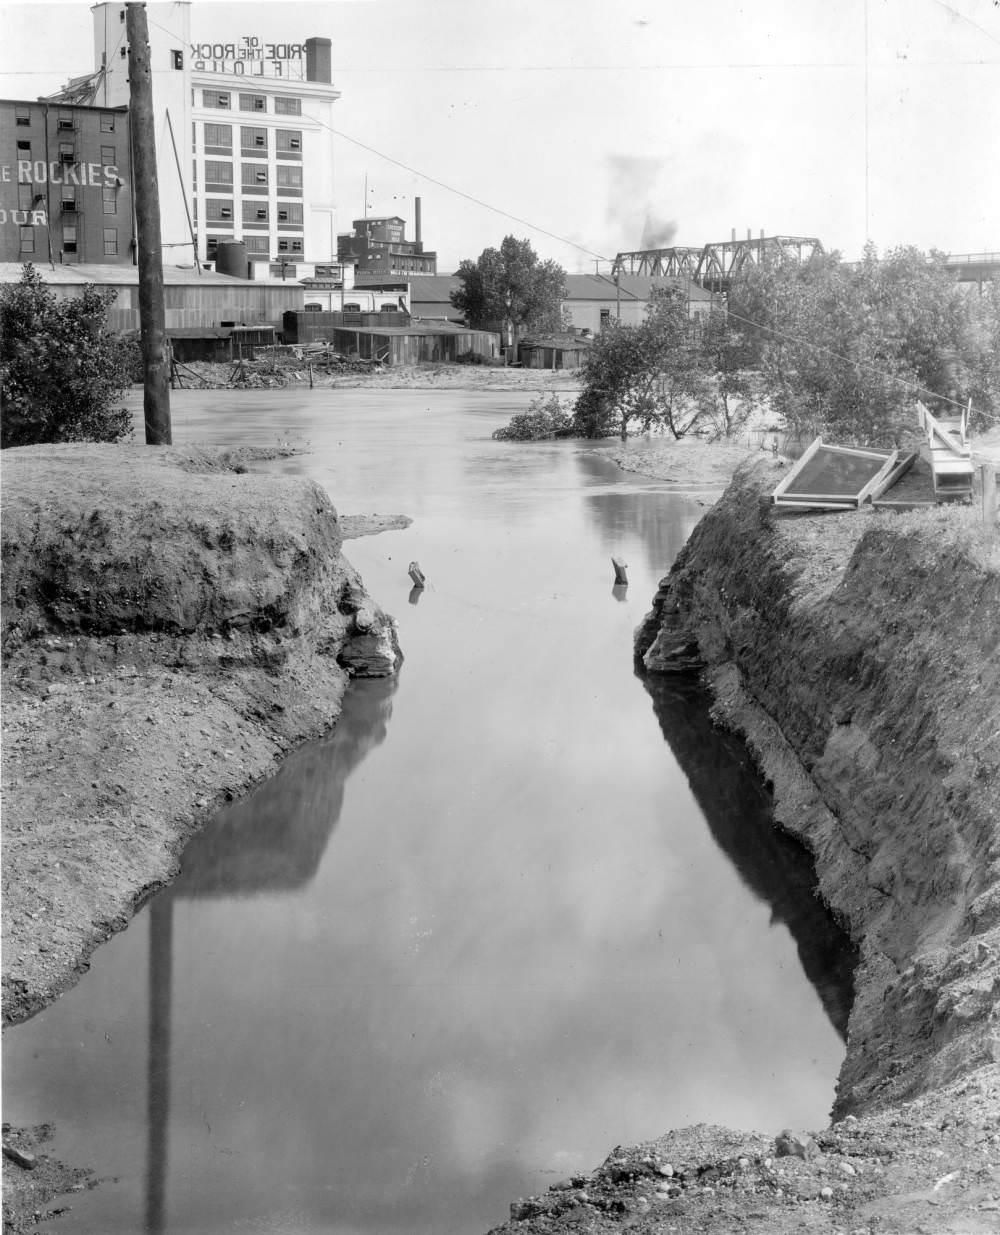 View of a ditch adjoining the South Platte River in Denver, 1909